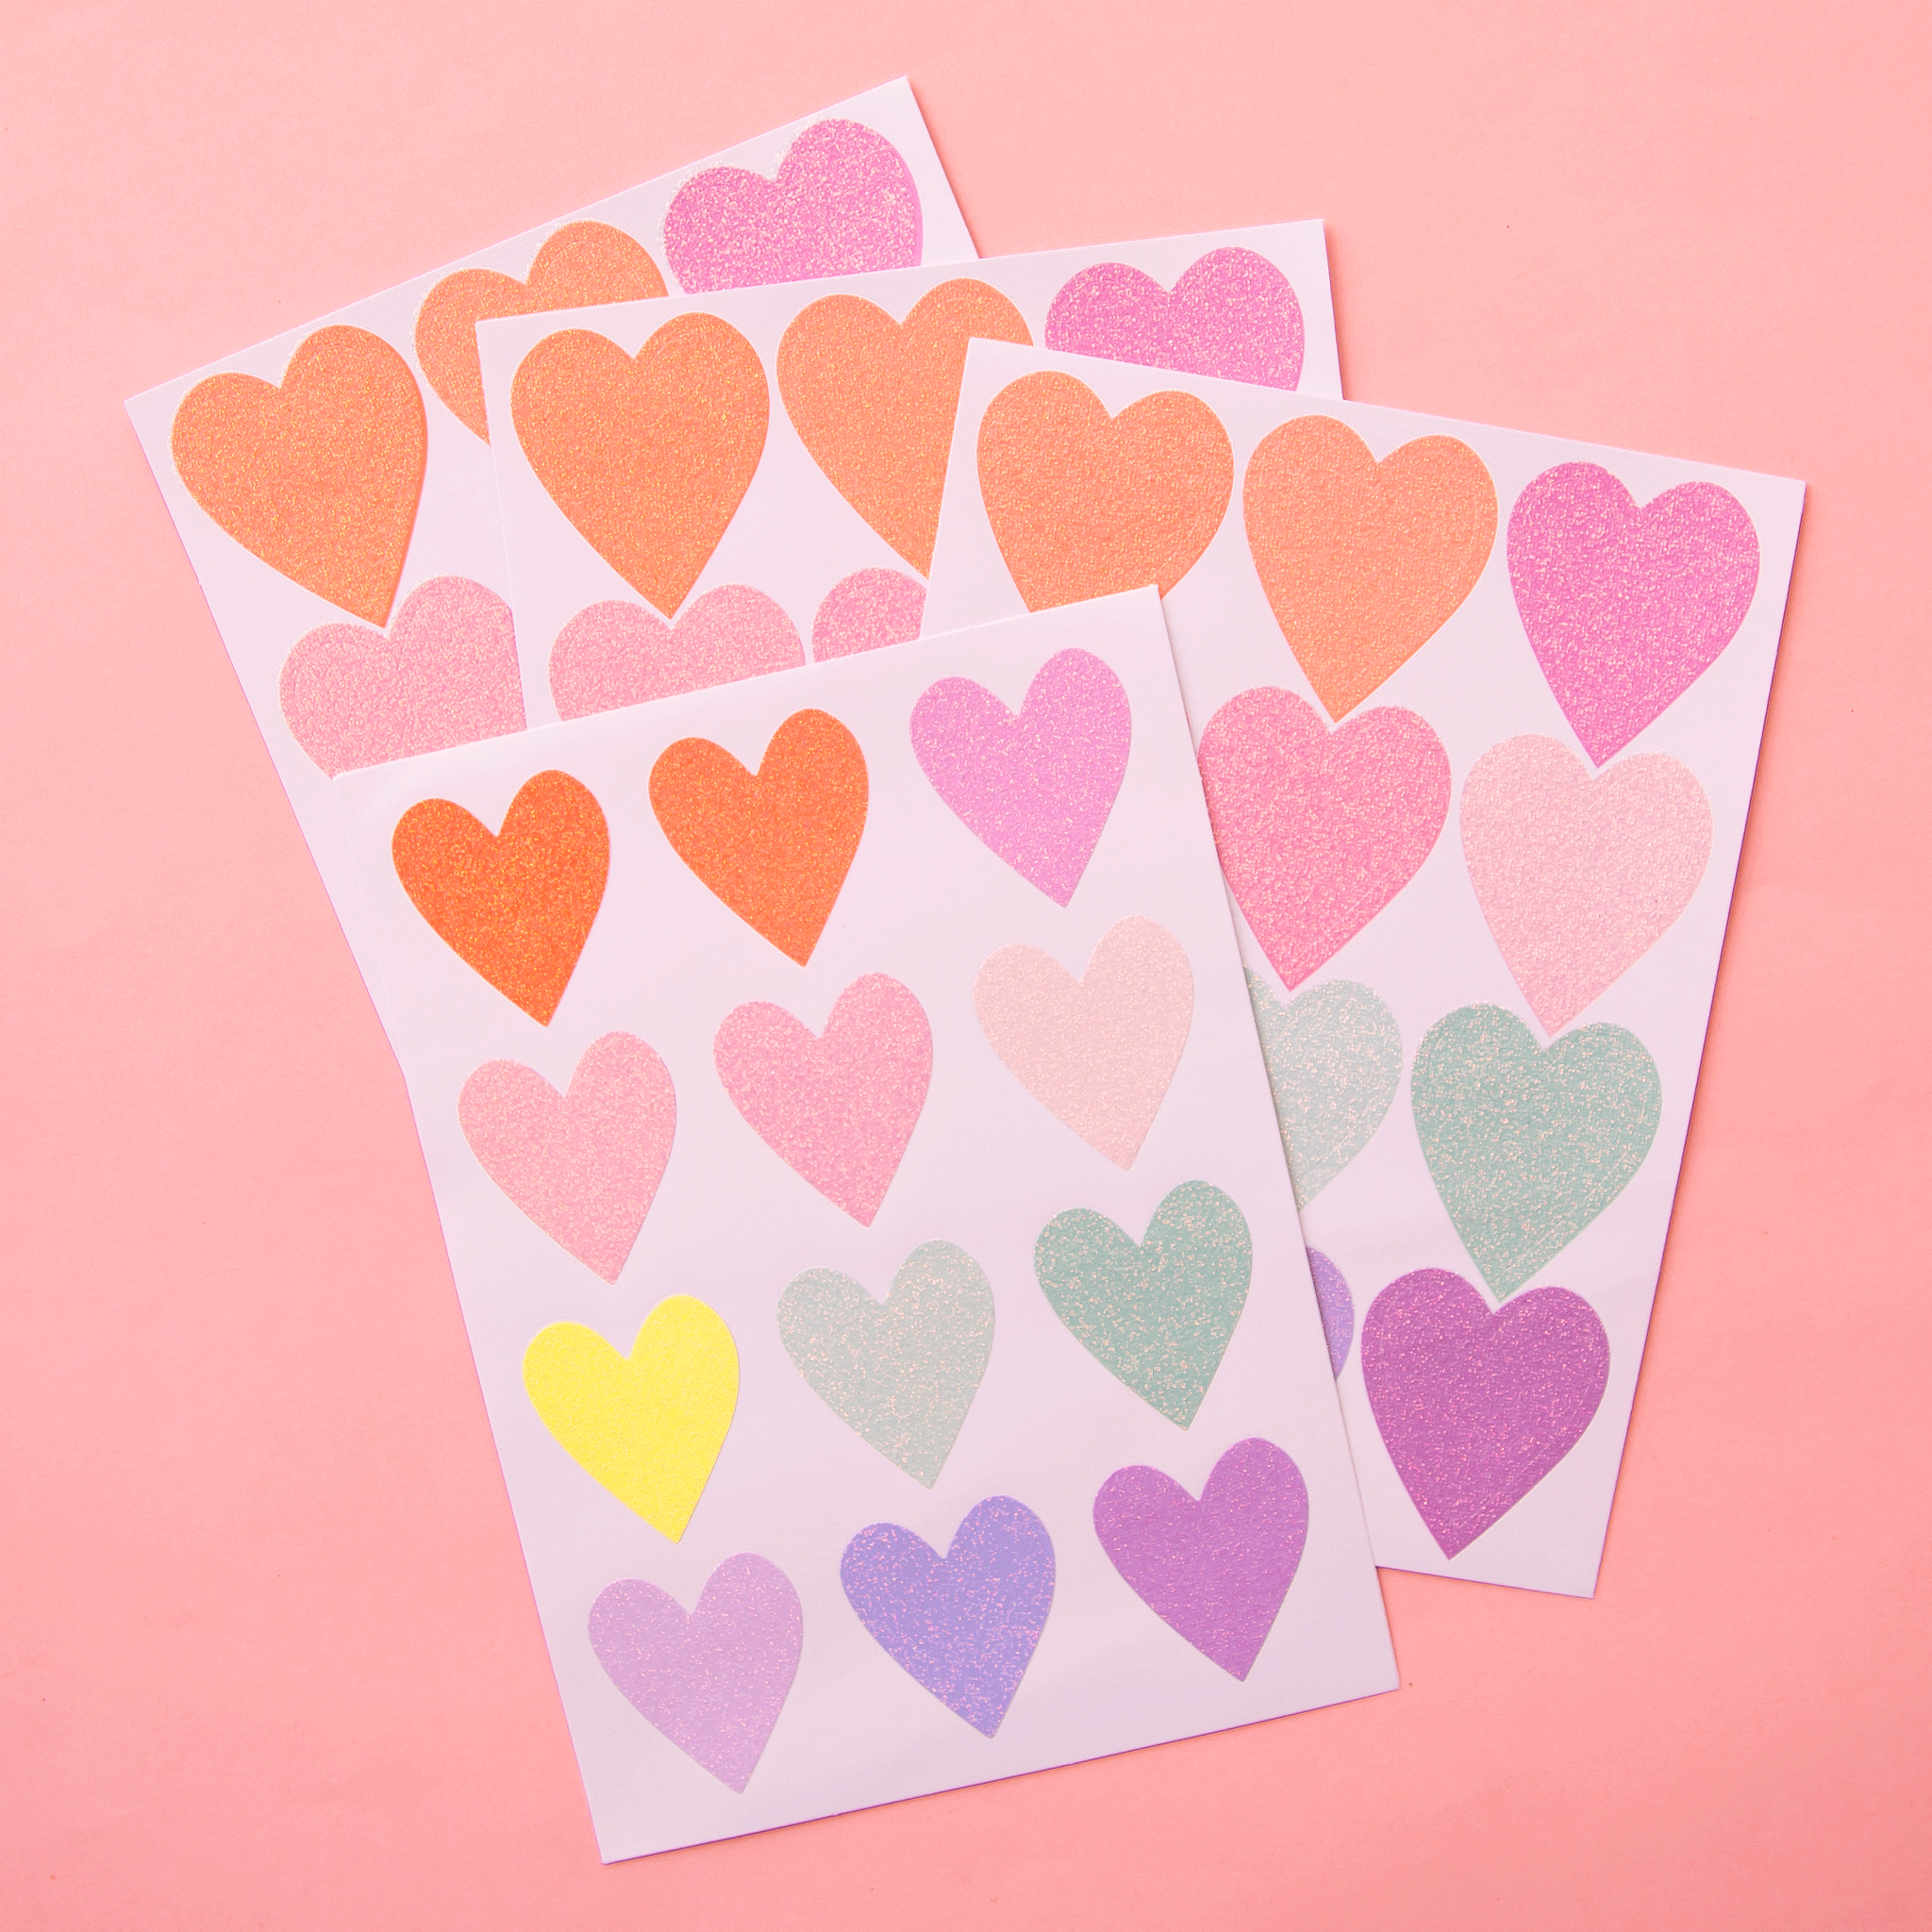 On a pink background is sheets of multi colored heart shaped stickers with glitter on them. 